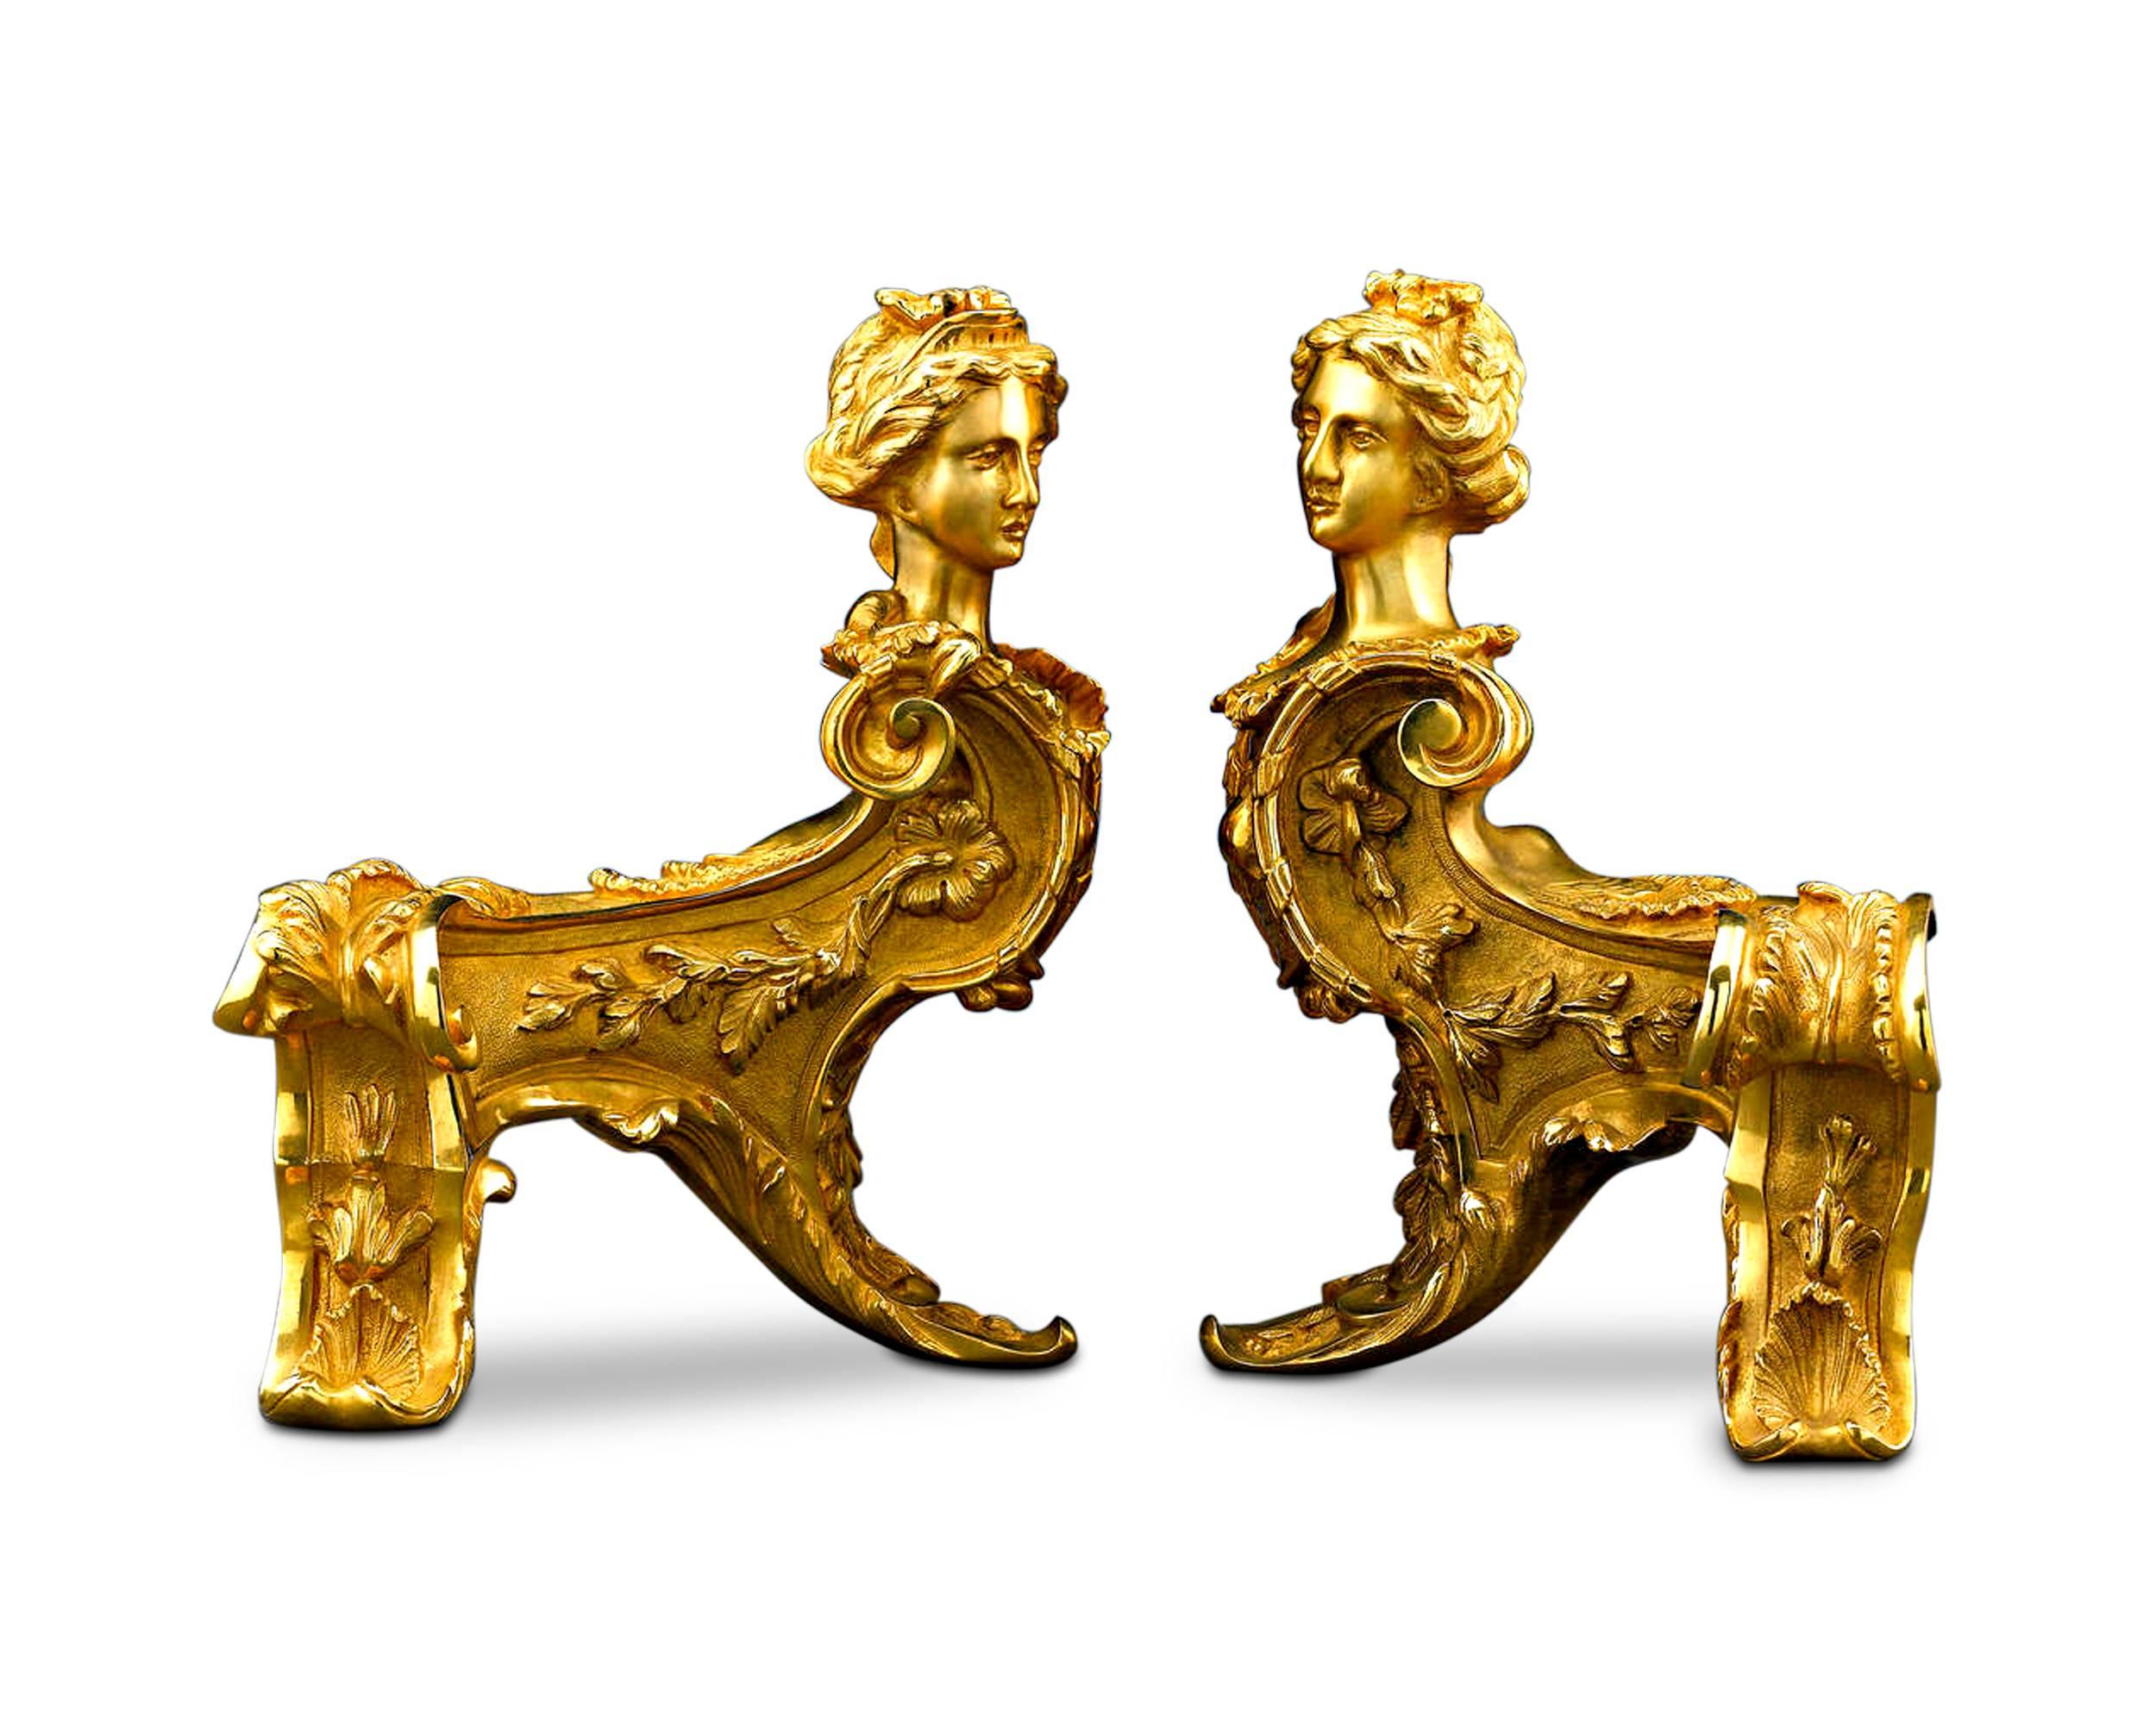 This rare and ornate pair of bronze ormolu chenets, or andirons, takes the form of two majestic sphinxes. Crafted in a thrilling Louis XIV style, these bronze ormolu fireplace guards also exhibit Classic Rococo decoration, such as flowering